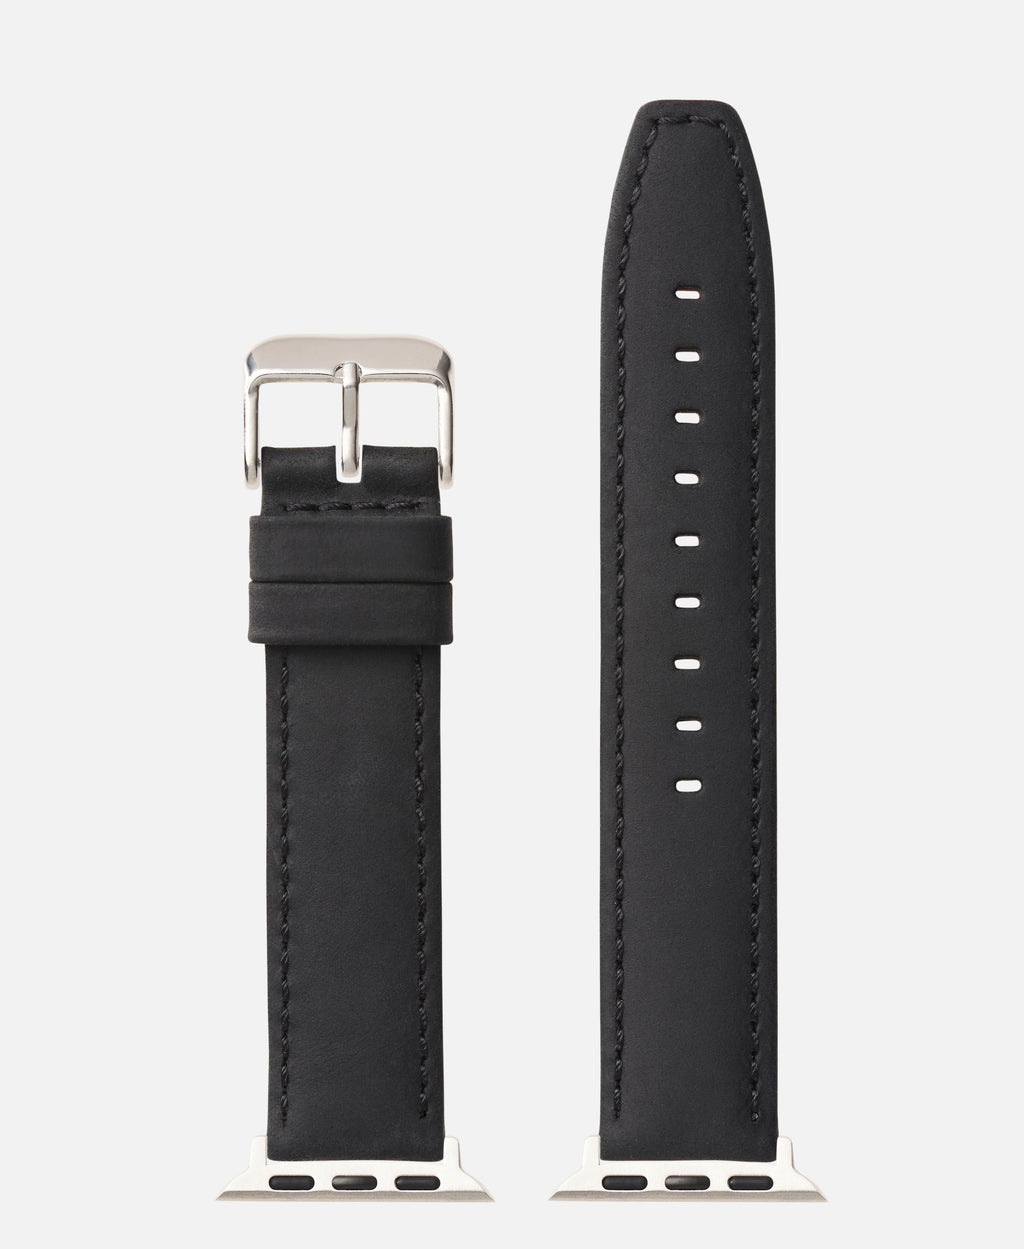  Apple Watch Compatible Black Color Distressed Crazy Horse Watch Band 38mm/40mm